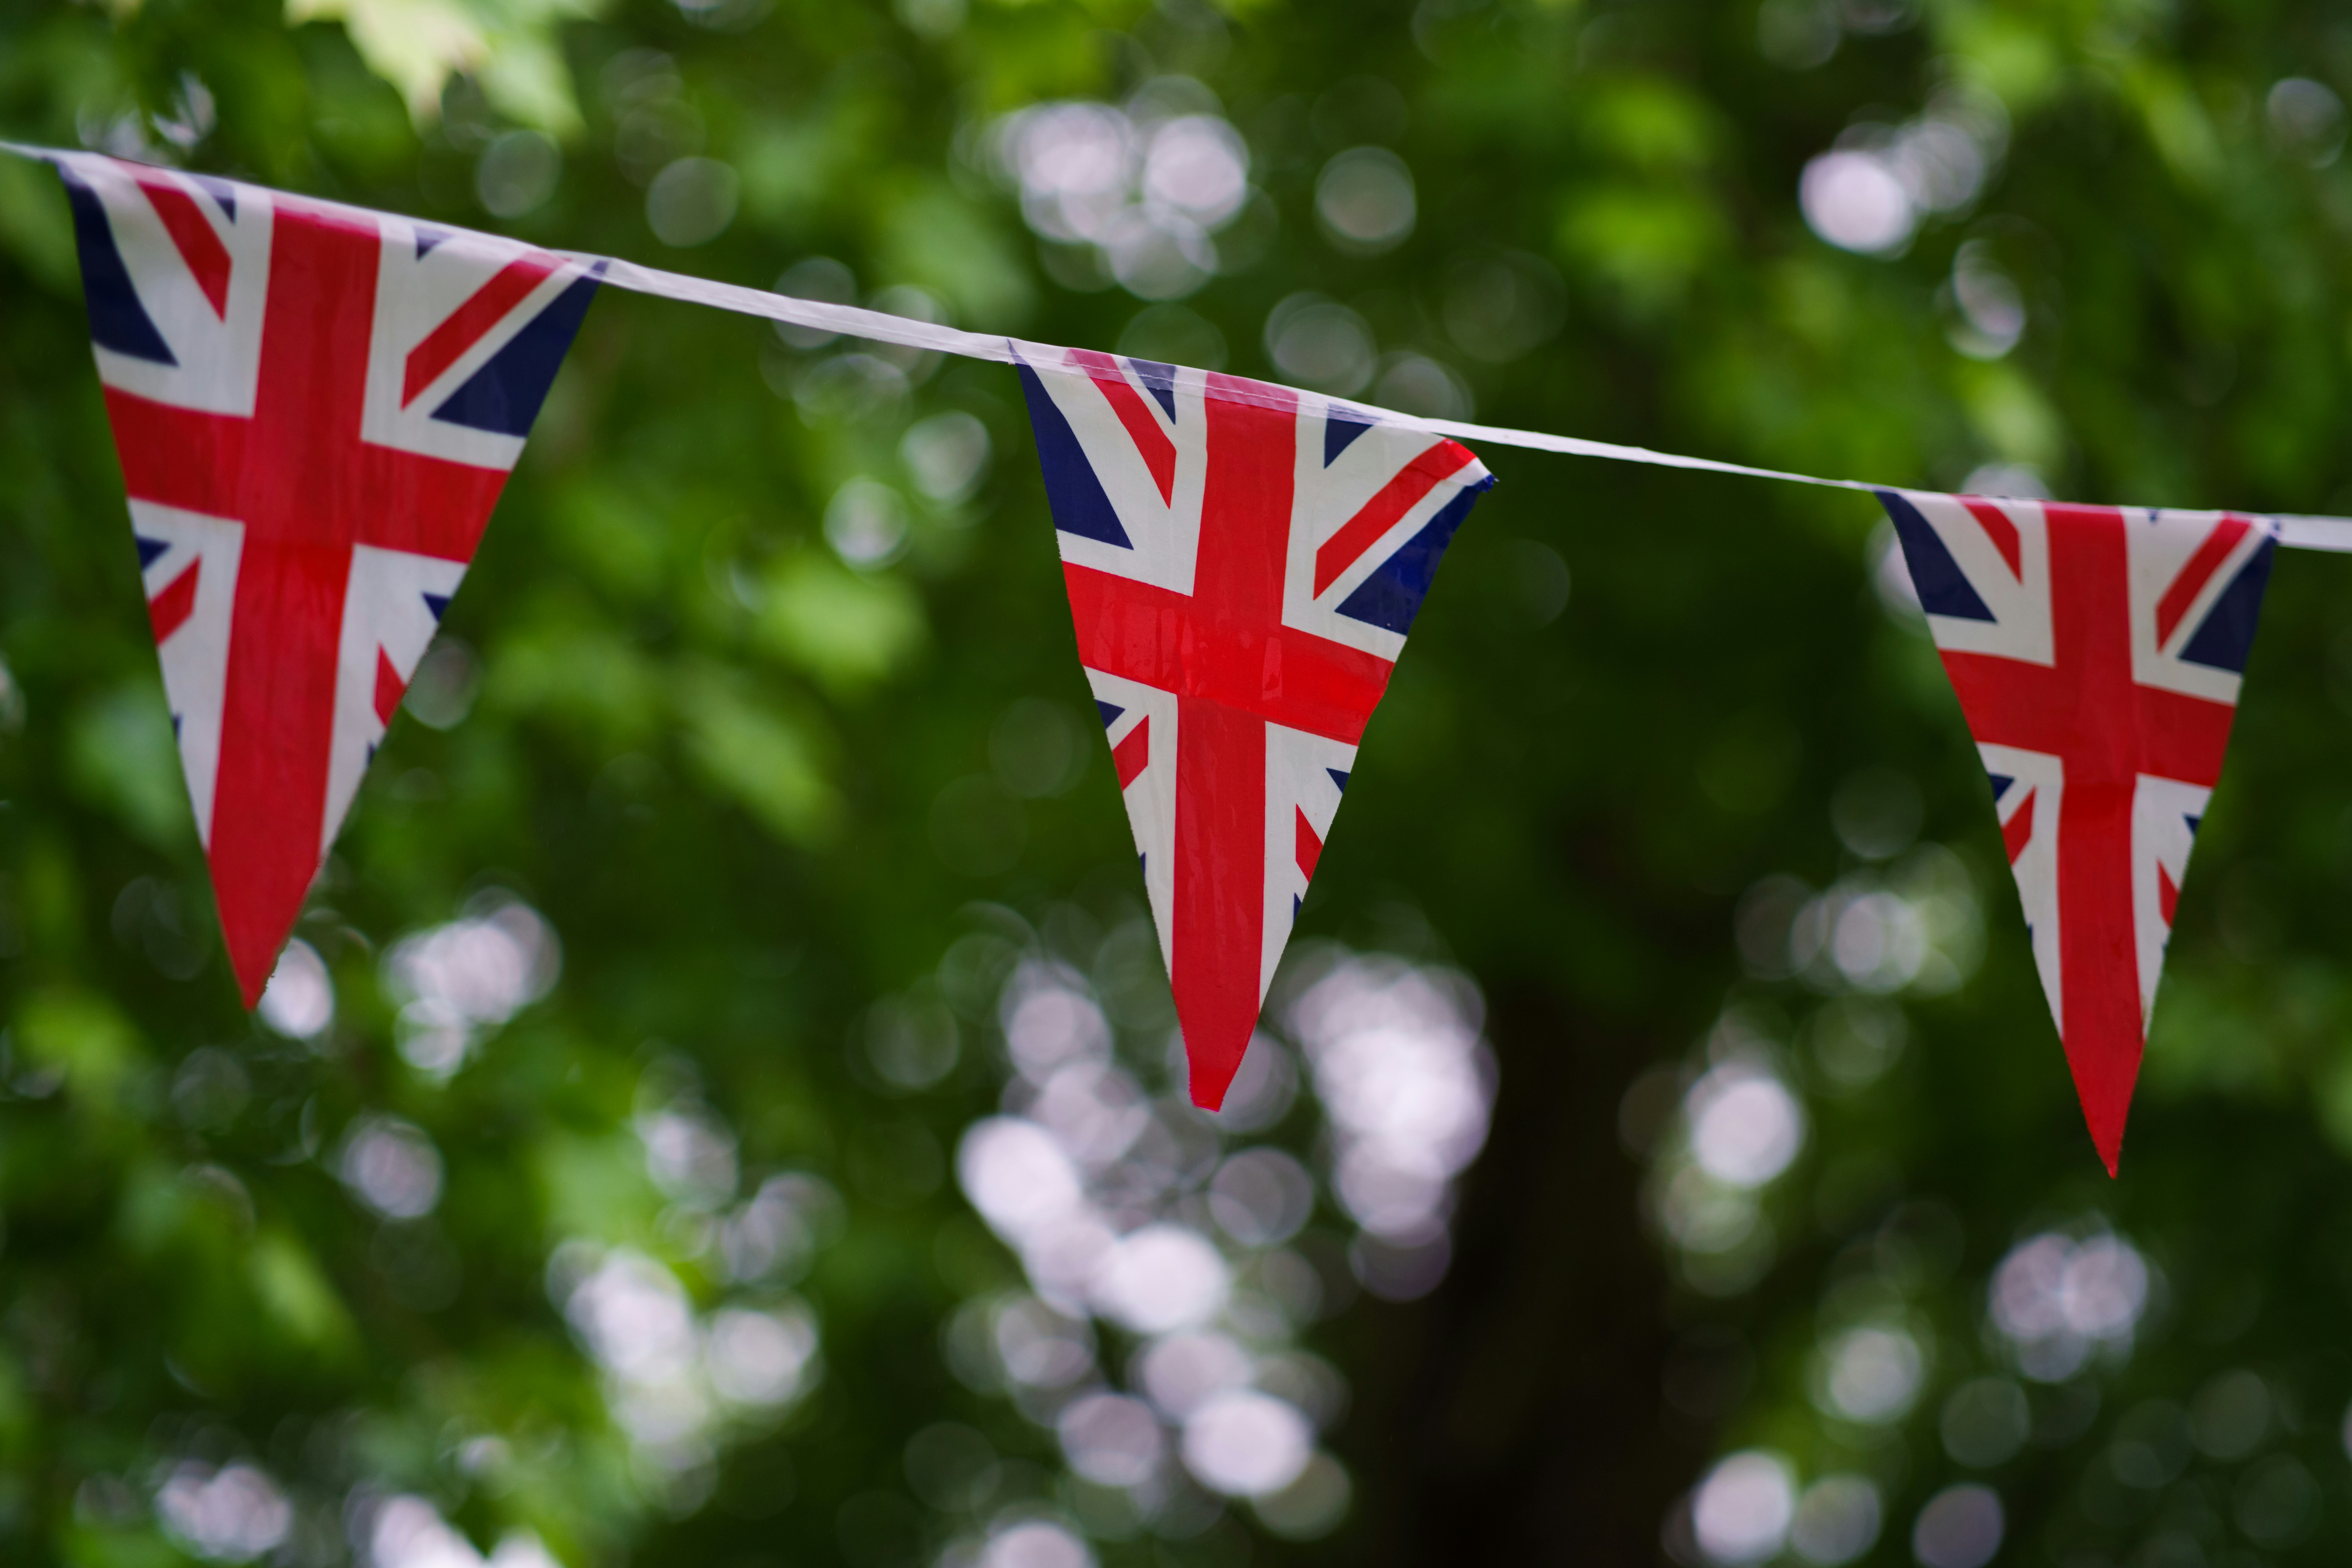 Union Jack flags out for a celebration such as a coronation or jubilee!